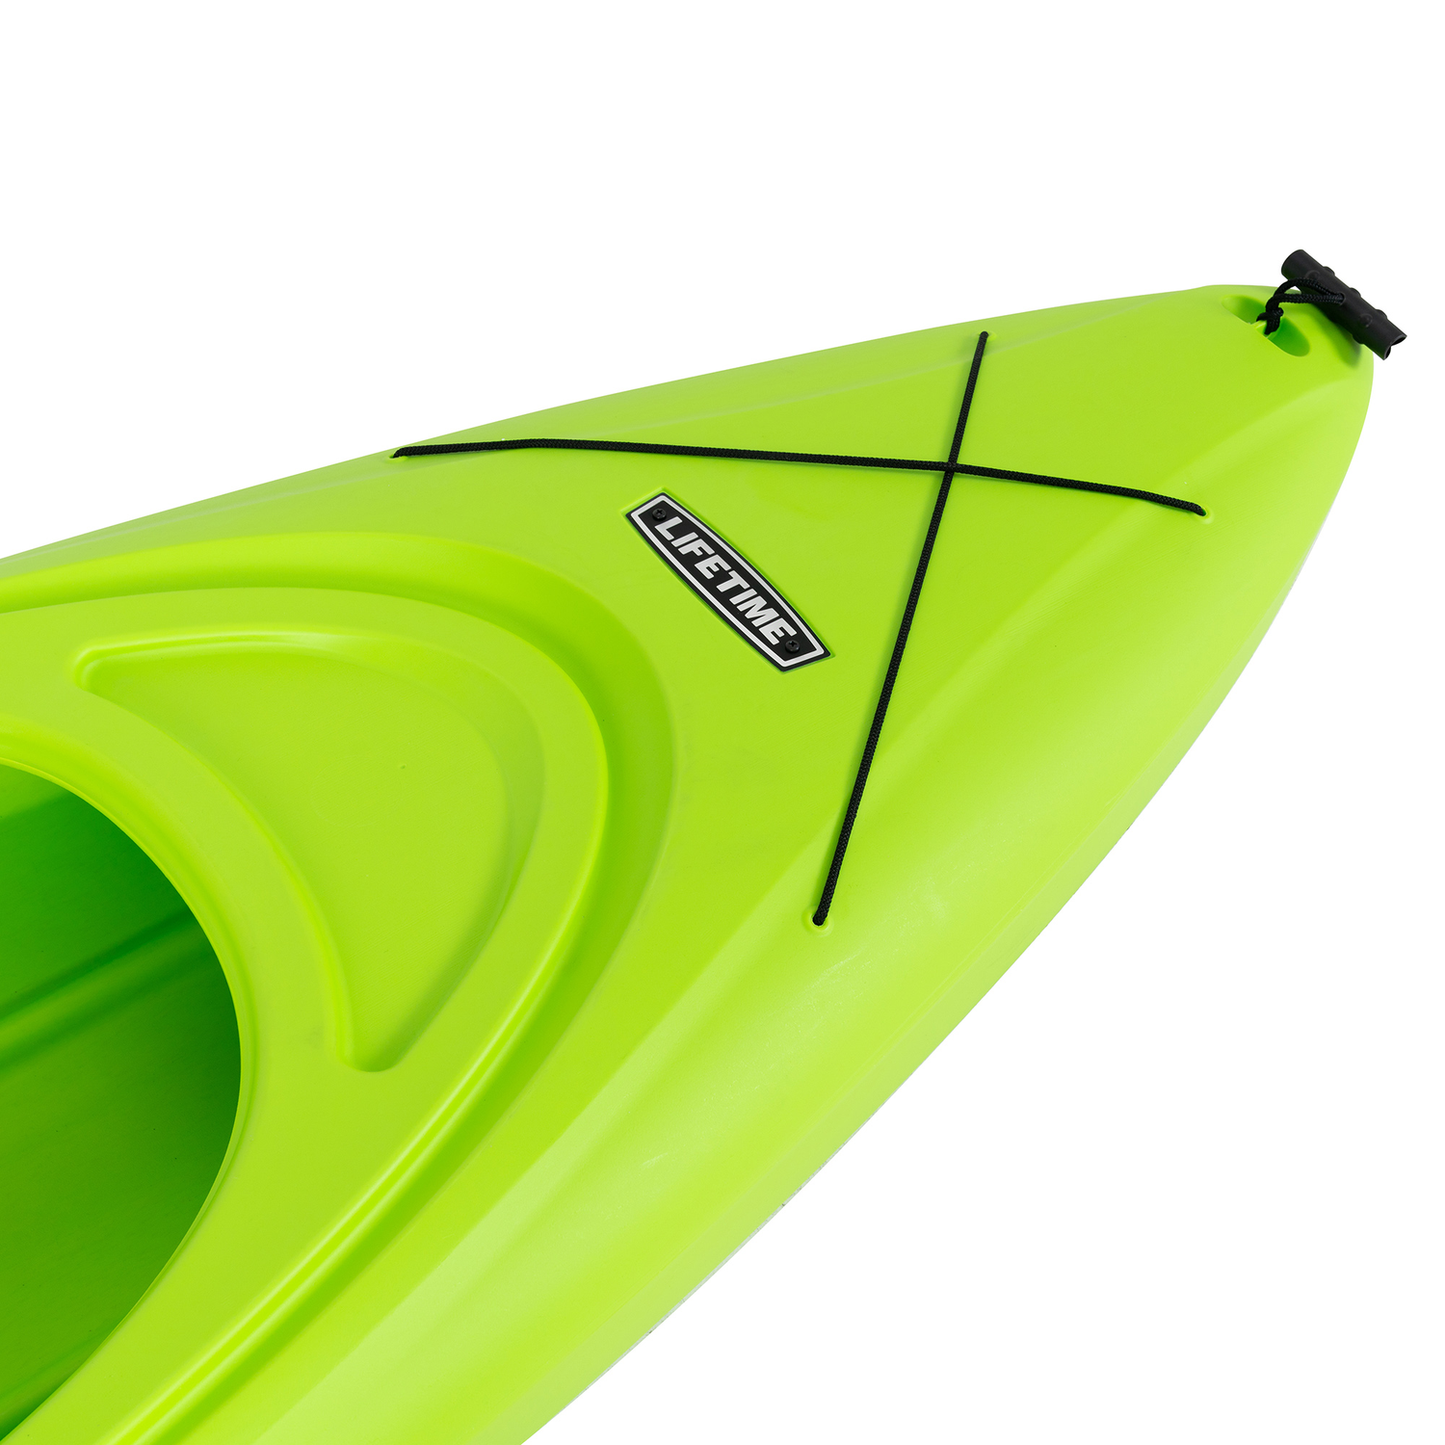 Lifetime Pacer 8 Ft Sit-In Kayak (Paddle Included), Green